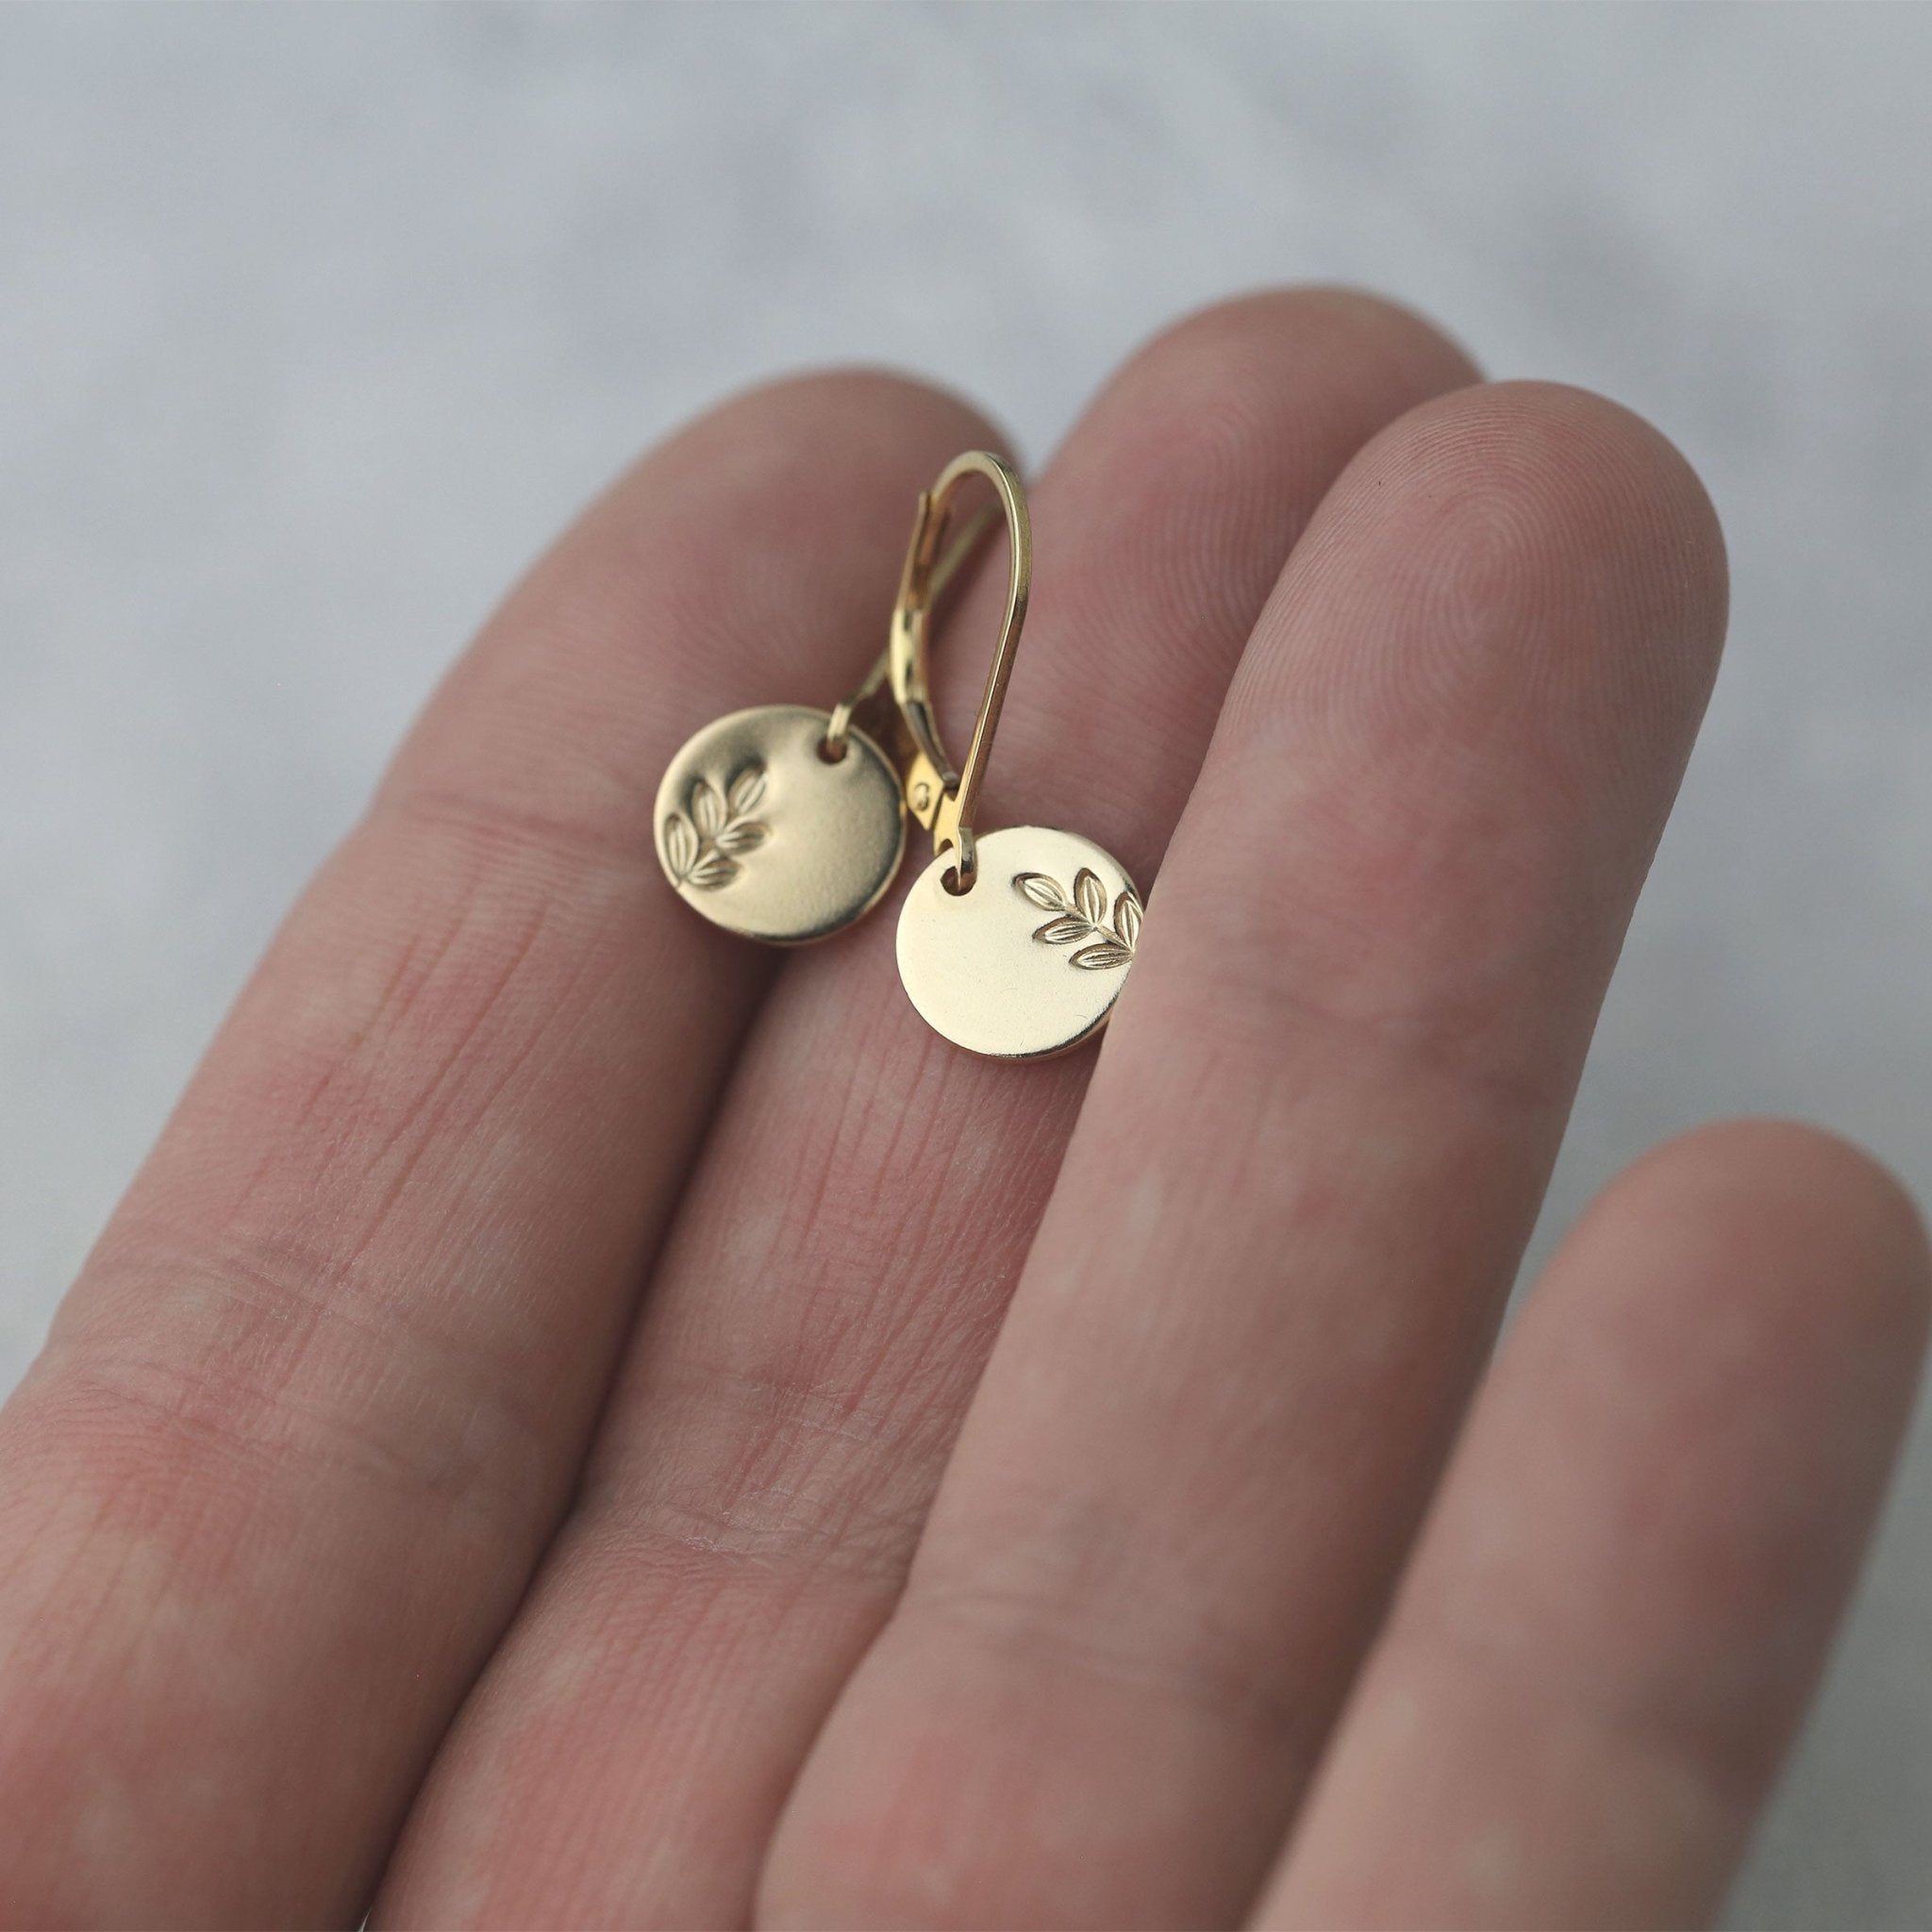 Tiny Gold Stamped Leaf Lever-back Earrings